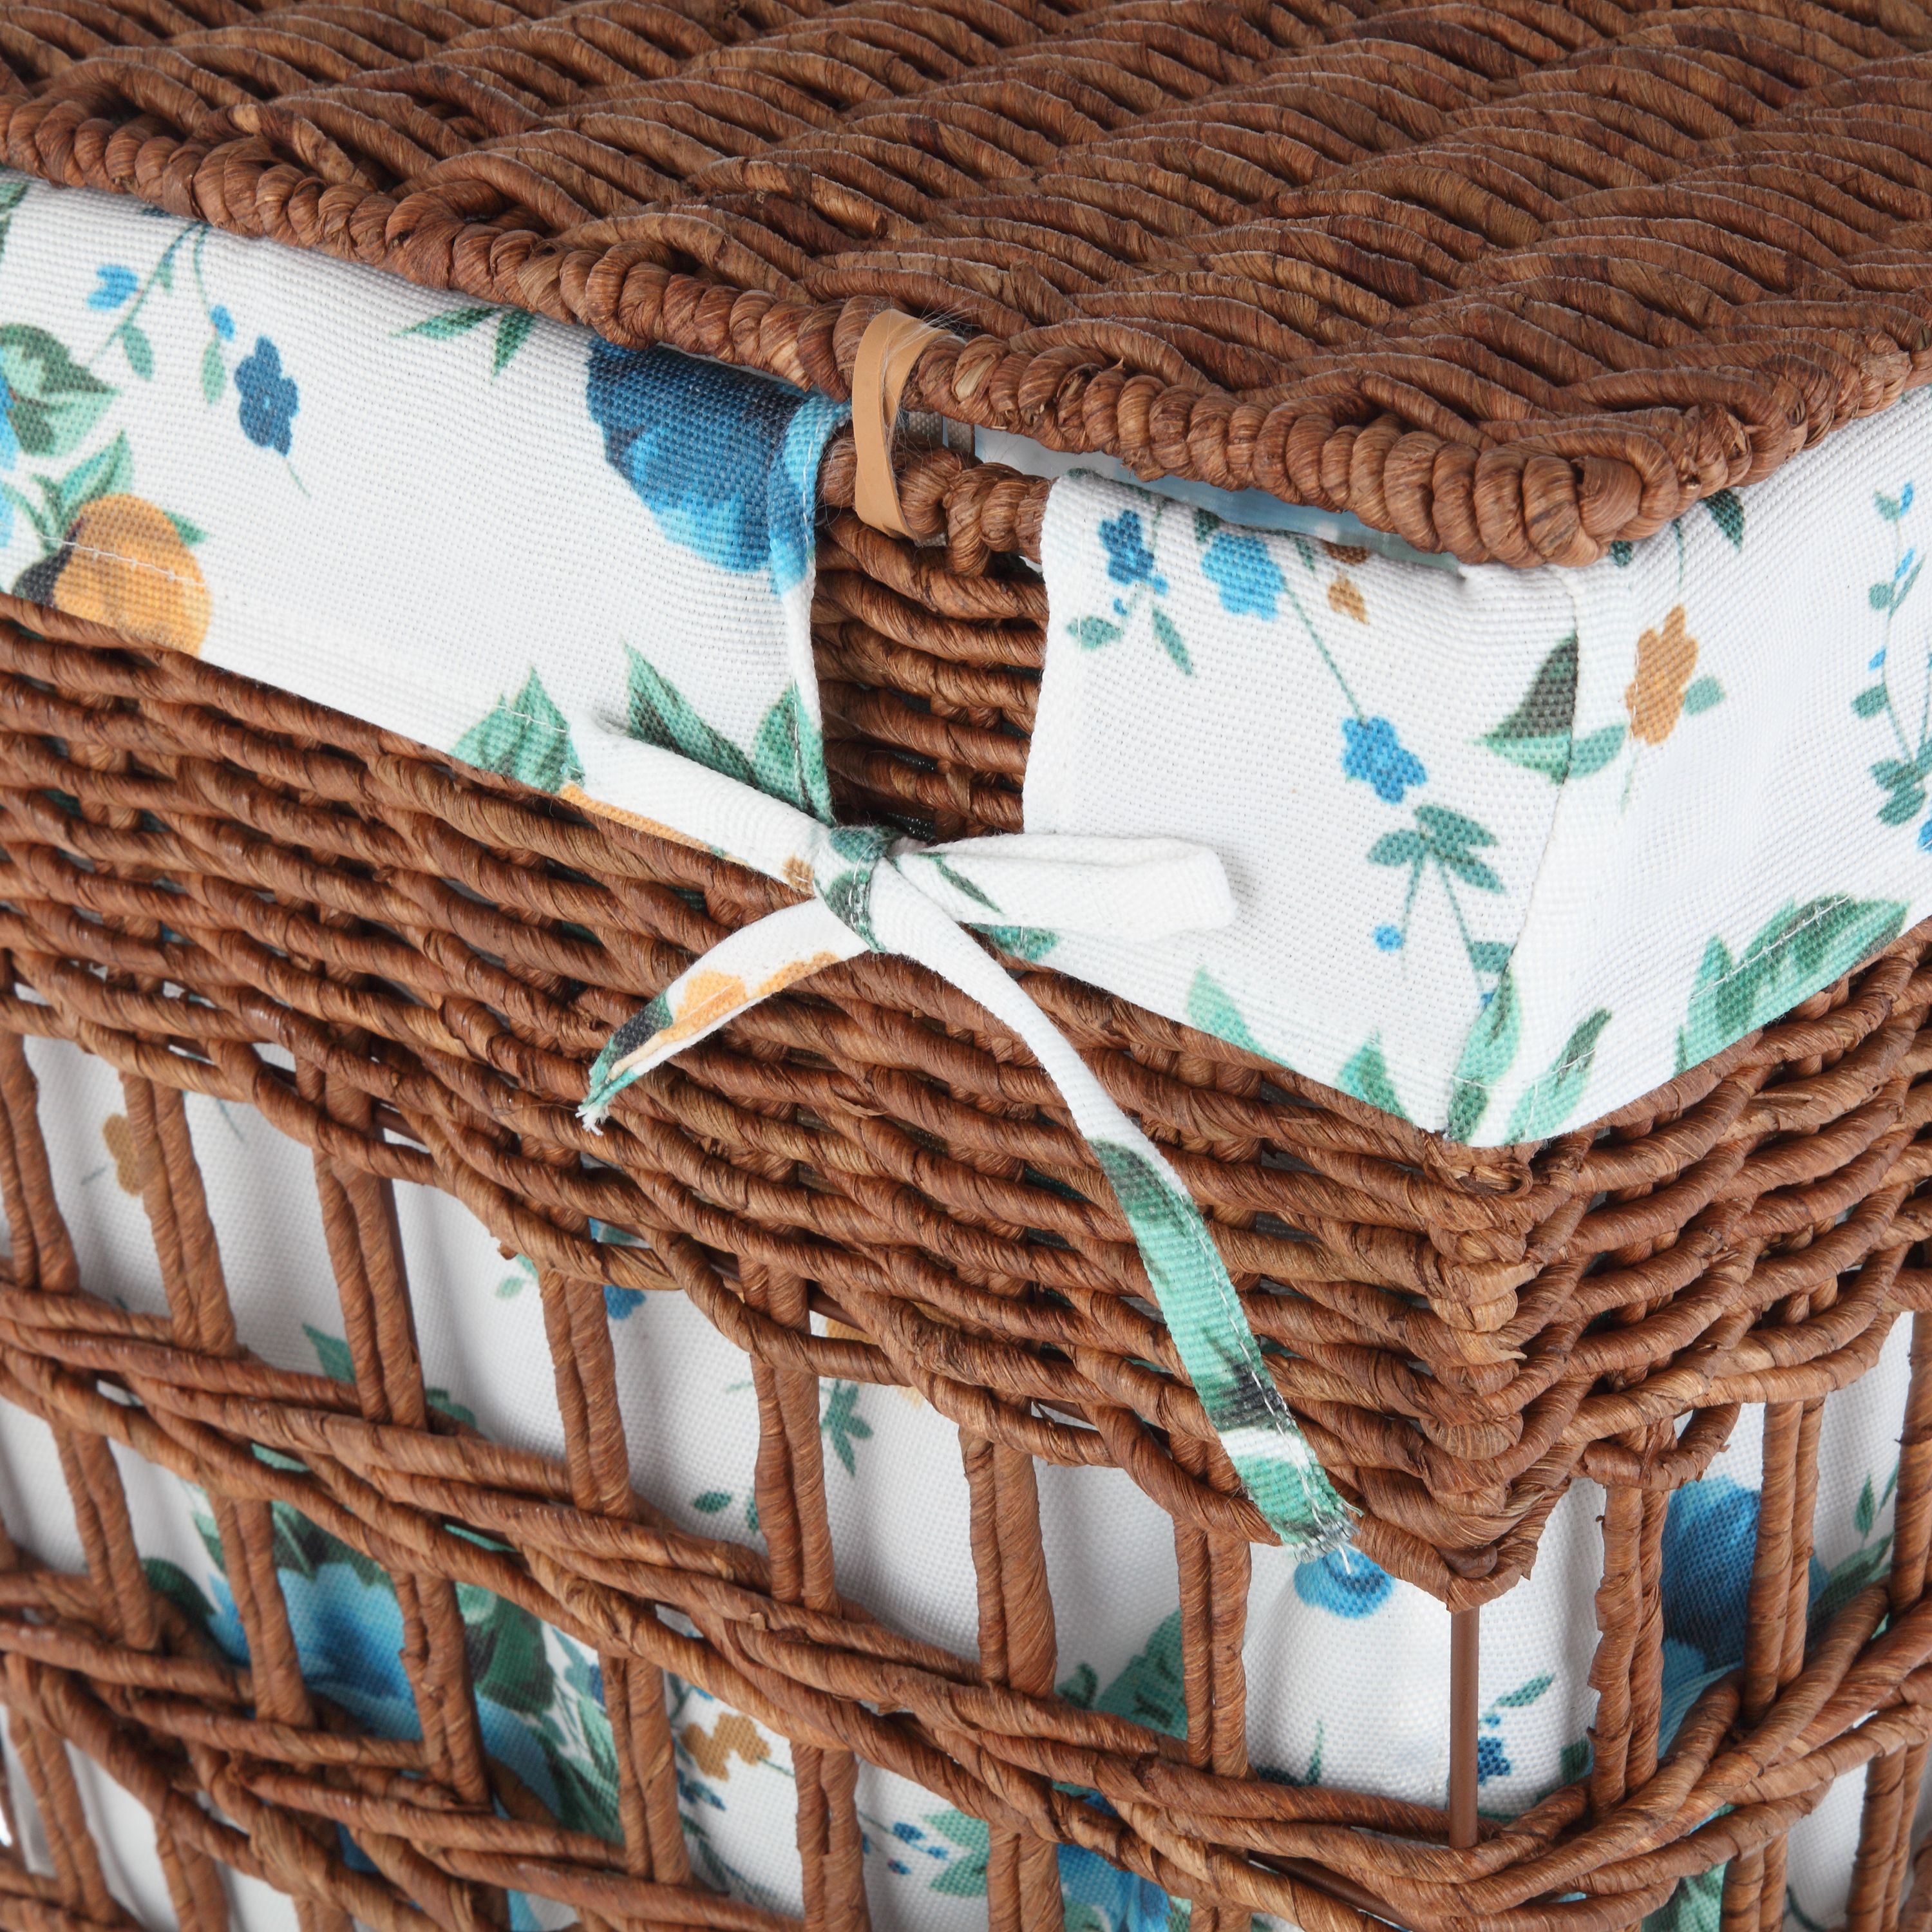 The Pioneer Woman Rose Shadow Maize Laundry Hamper - image 3 of 6